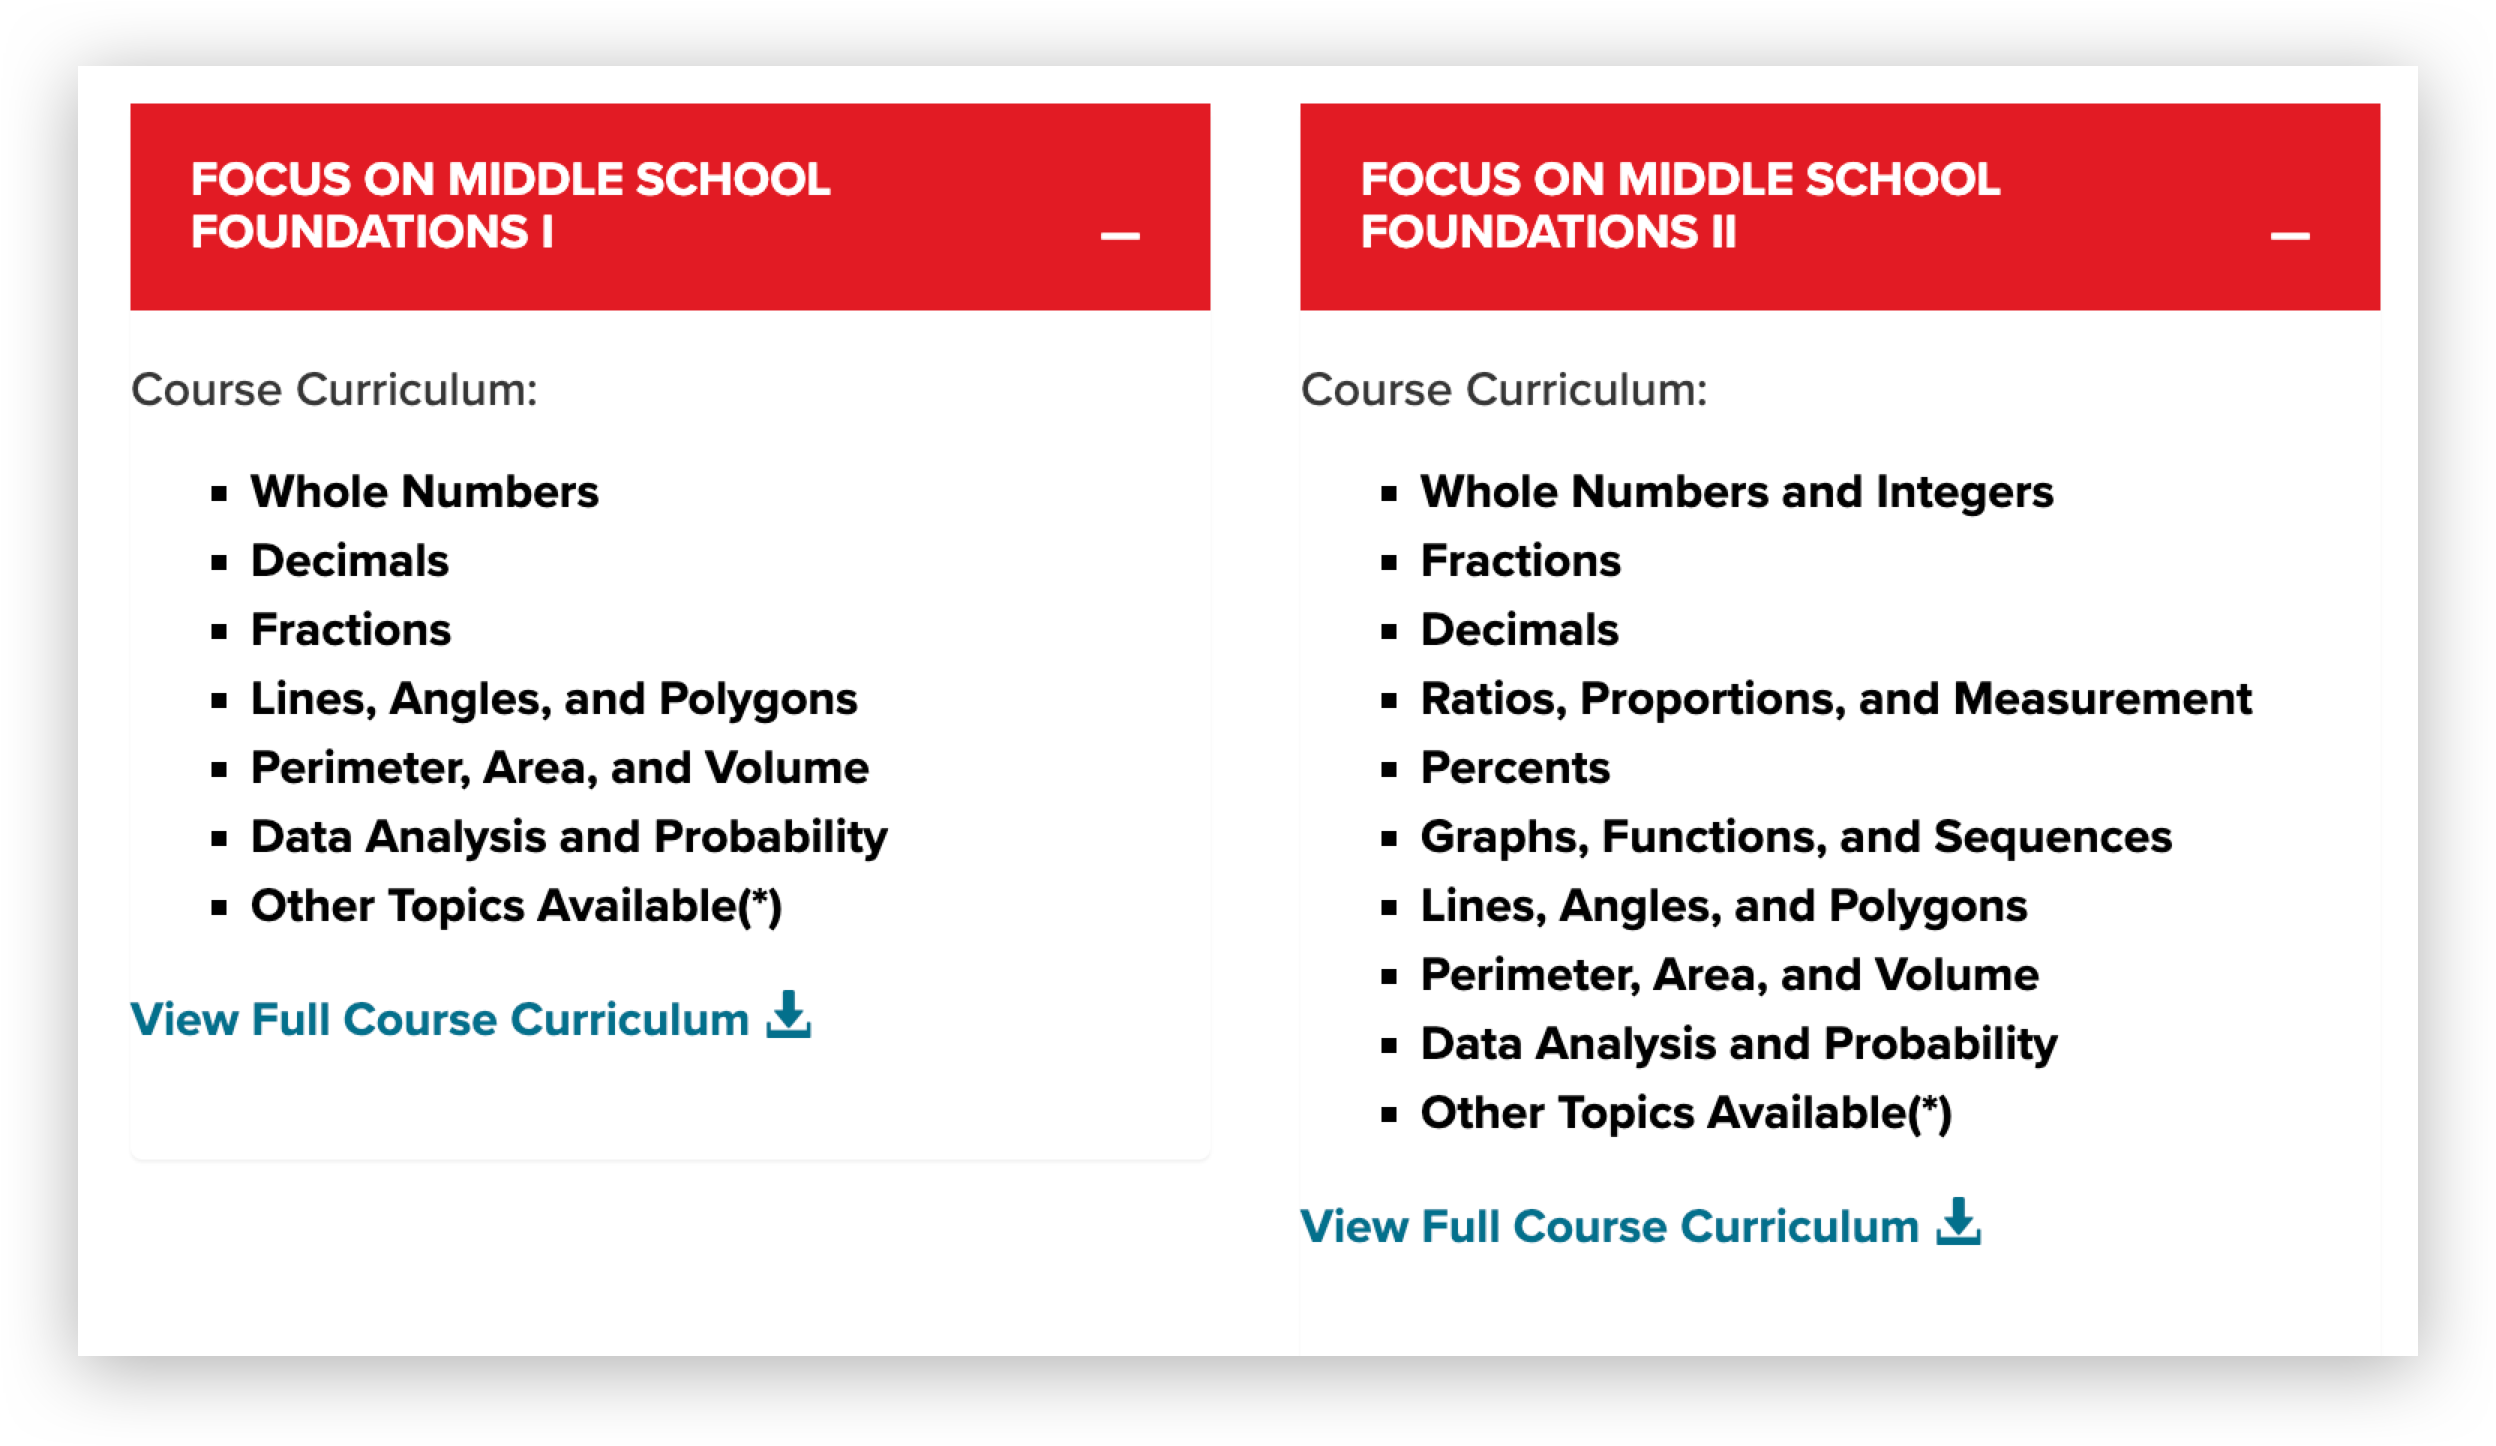 FOCUS ON MIDDLE SCHOOL FOUNDATIONS I, Course Curriculum :, Whole Numbers Decimals Fractions Lines, Angles, and Polygons Perimeter, Area, and Volume Data Analysis and Probability Other Topics Available ( ) View Full Course Curriculum, FOCUS ON MIDDLE SCHOOL FOUNDATIONS II, Course Curriculum :, Whole Numbers and Integers Fractions Ratios, Proportions, and Measurement Percents Graphs, Functions, and Sequences Lines, Angles, and Polygons Perimeter, Area, and Volume, Data Analysis and Probability Other Topics Available ( ), View Full Course Curriculum